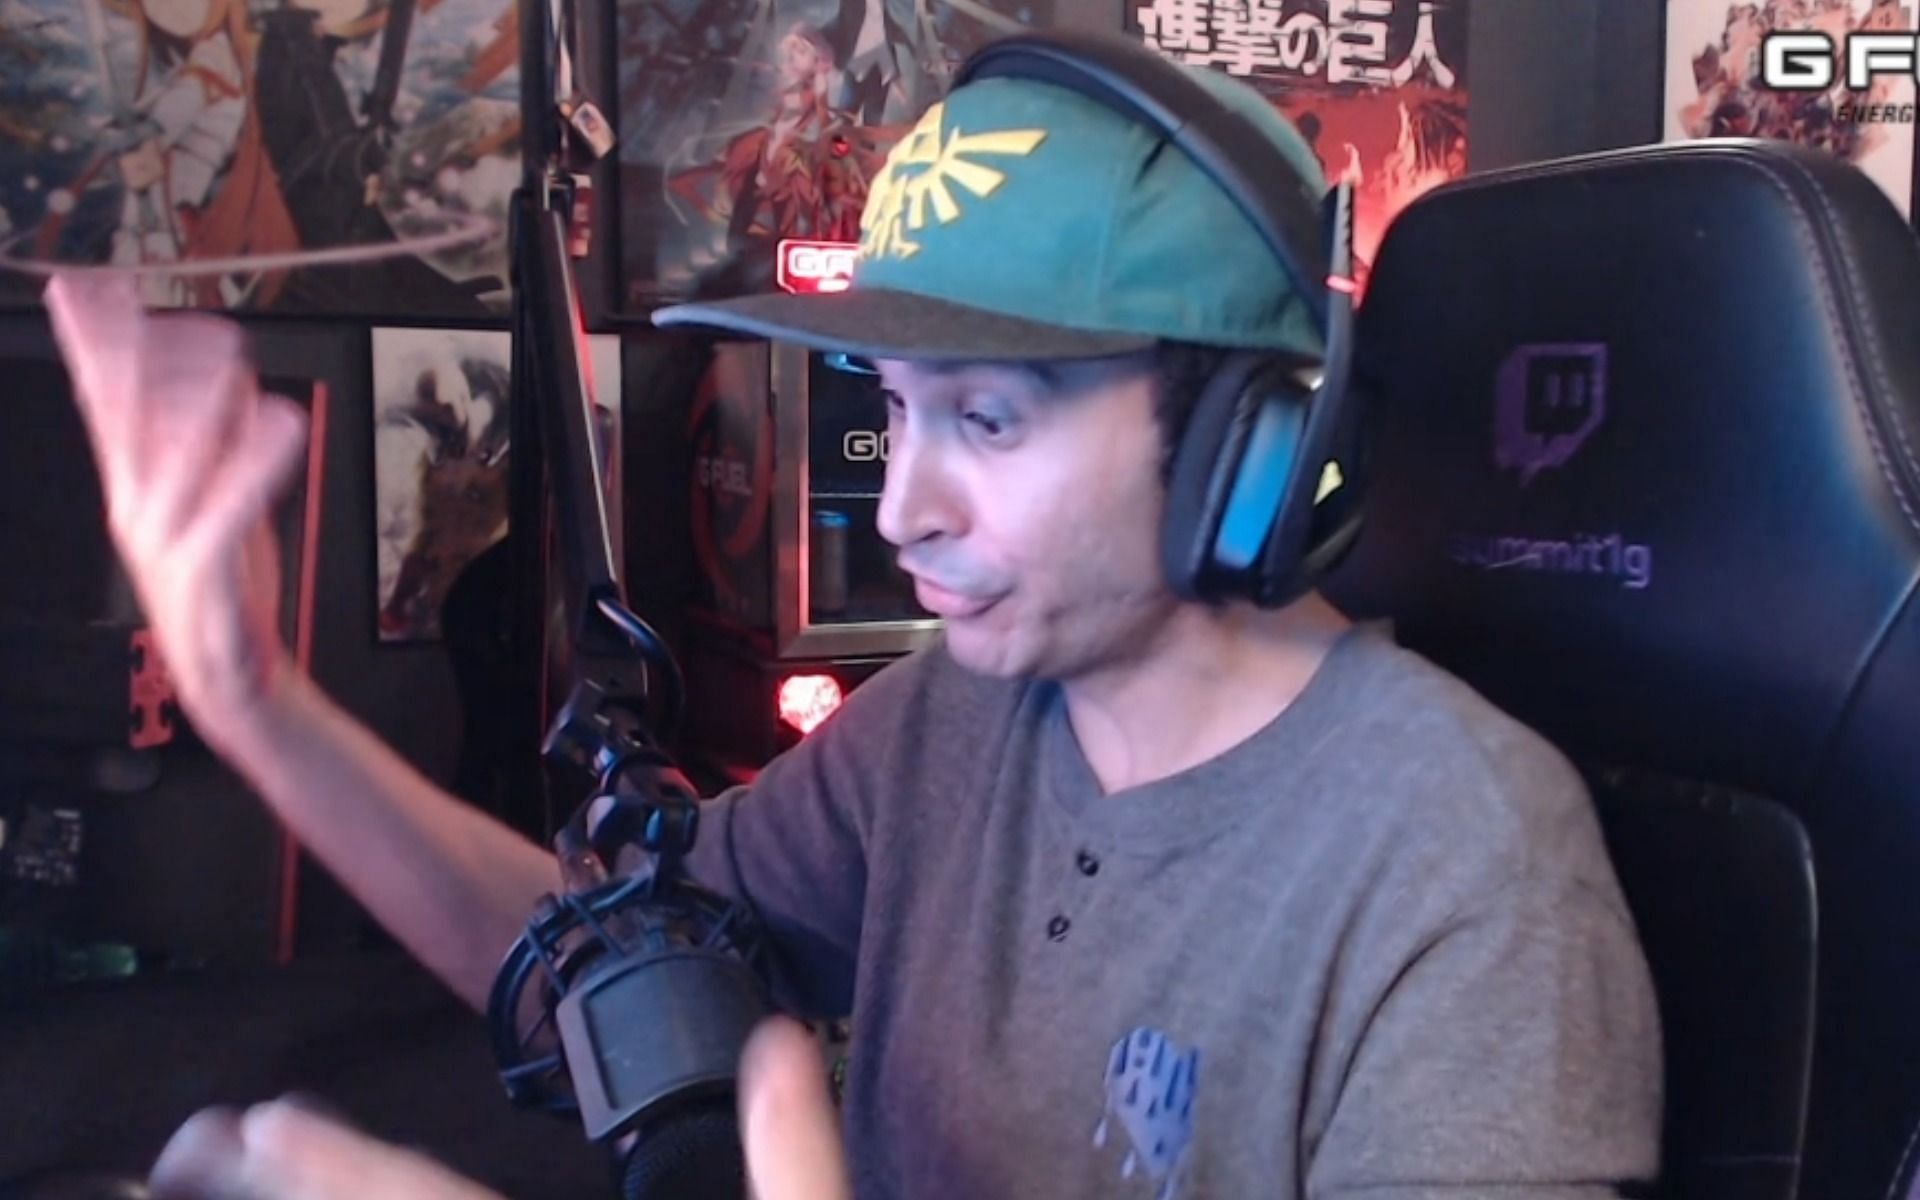 Summit1g loses cool over Hearthstone&#039;s rigorous challenge mode (Image via Twitch/summit1g)